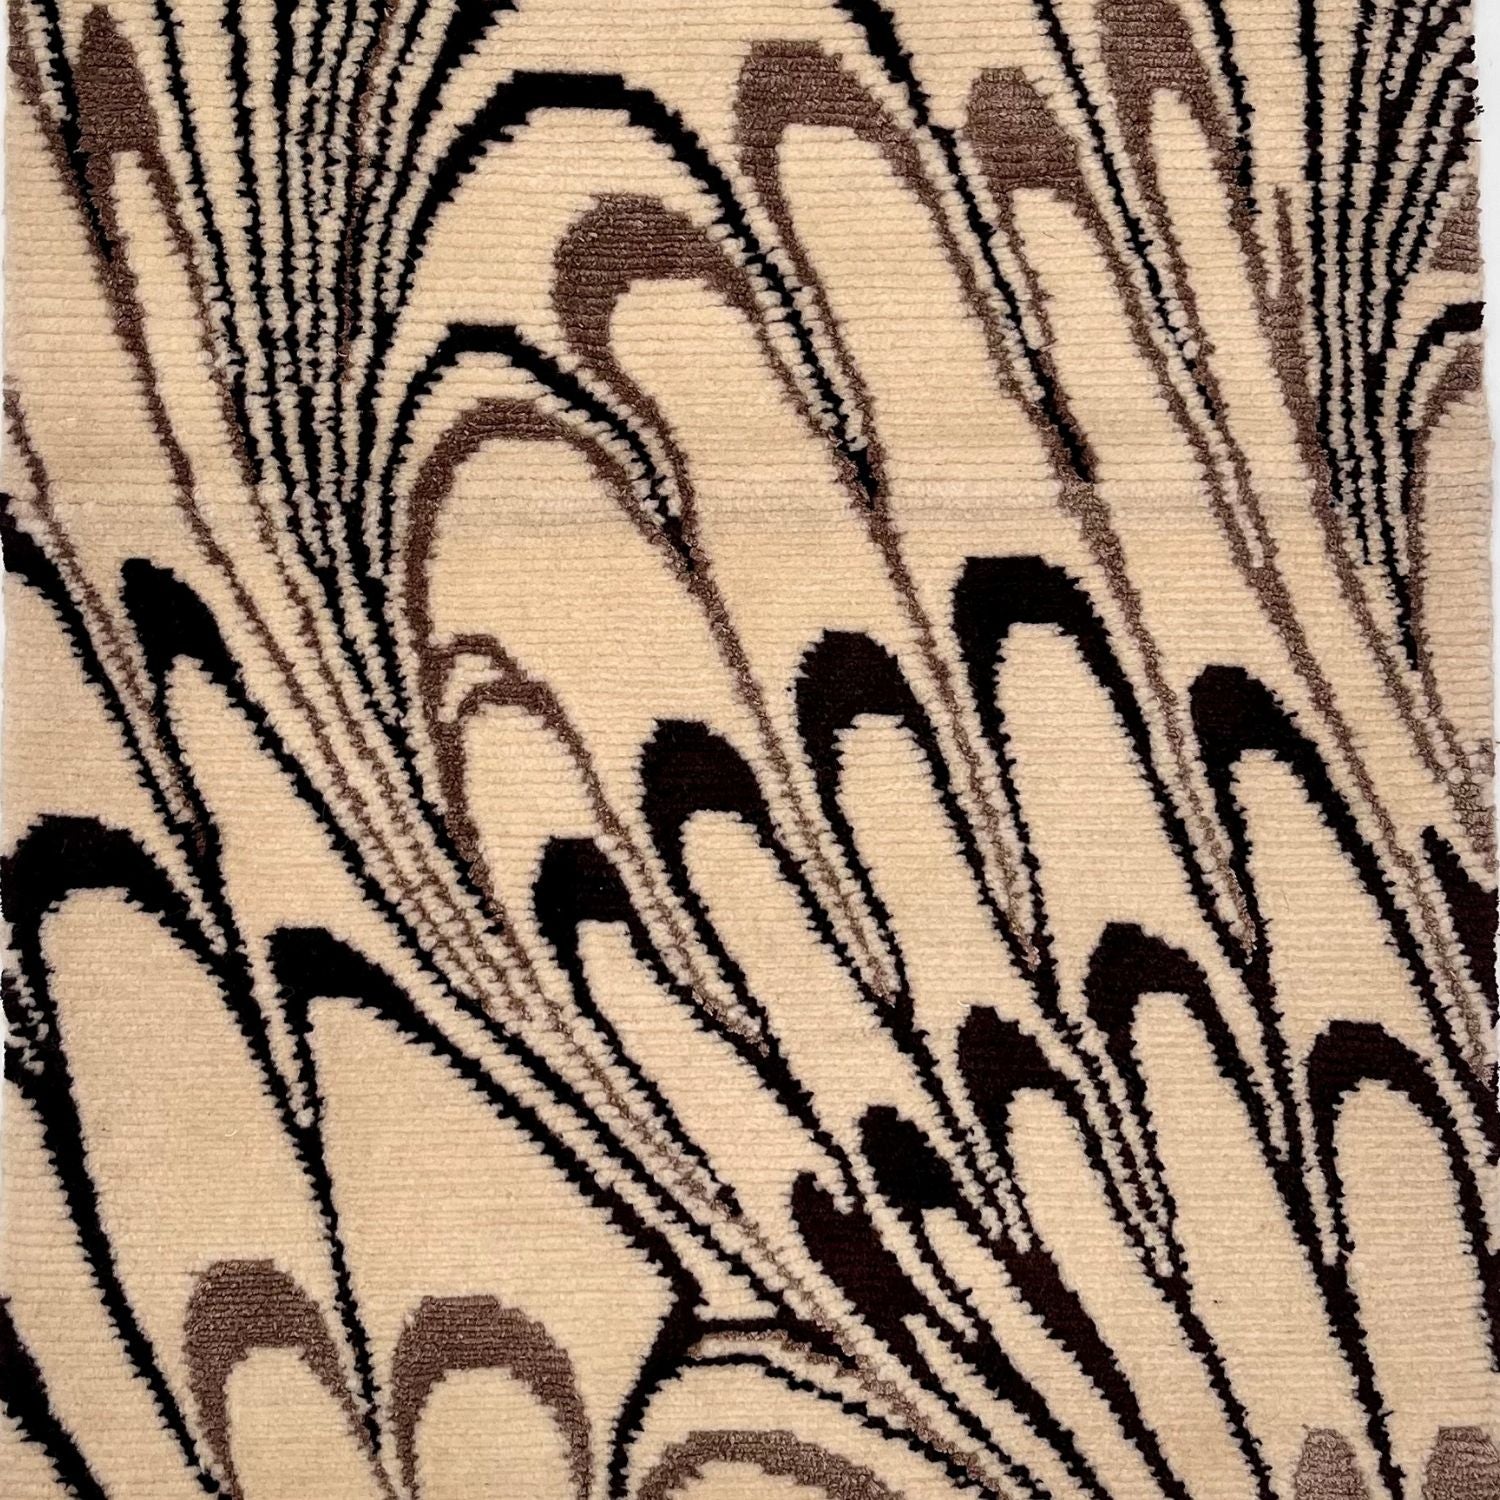 Detail of a rug with an ivory background and abstract pattern in medium brown and dark brown.